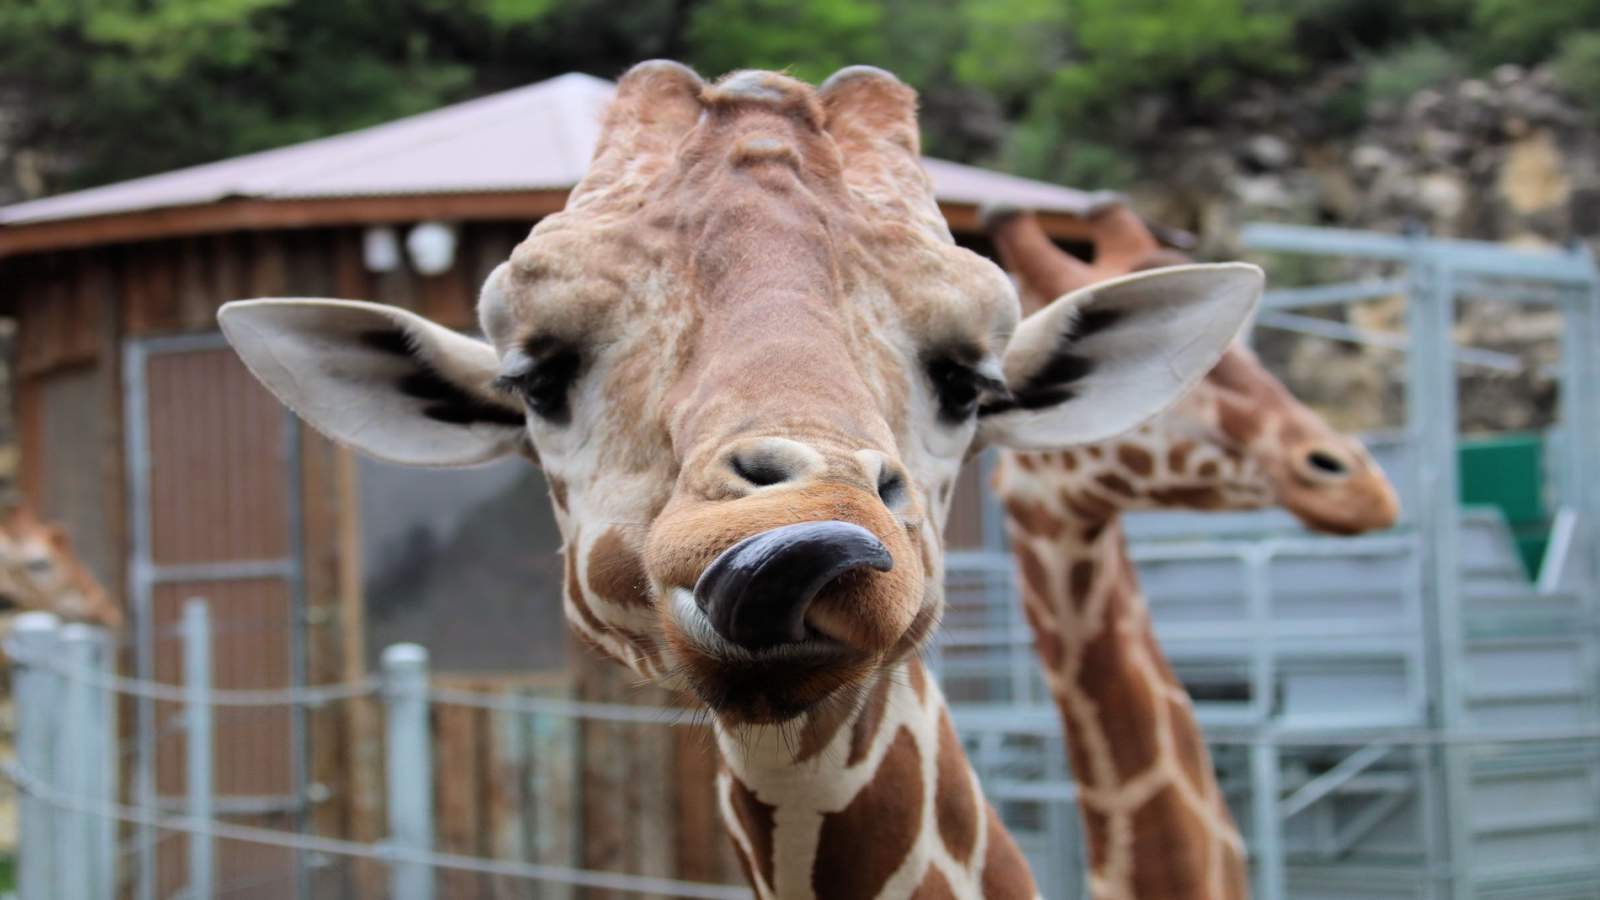 Admission to San Antonio Zoo is $8 on Thursday for locals